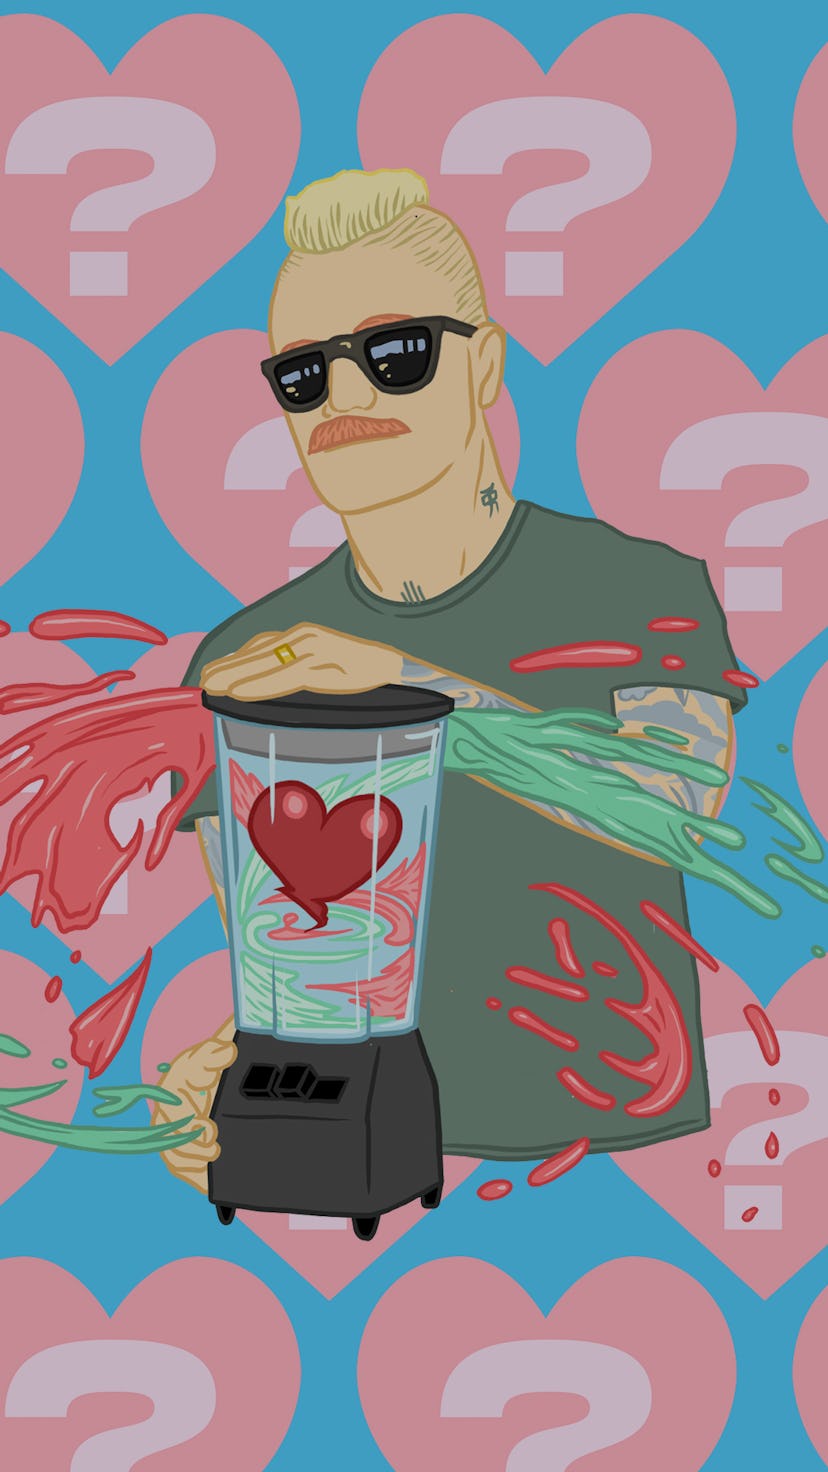 Illustration of Eve 6's Max Collins with hearts and question marks background